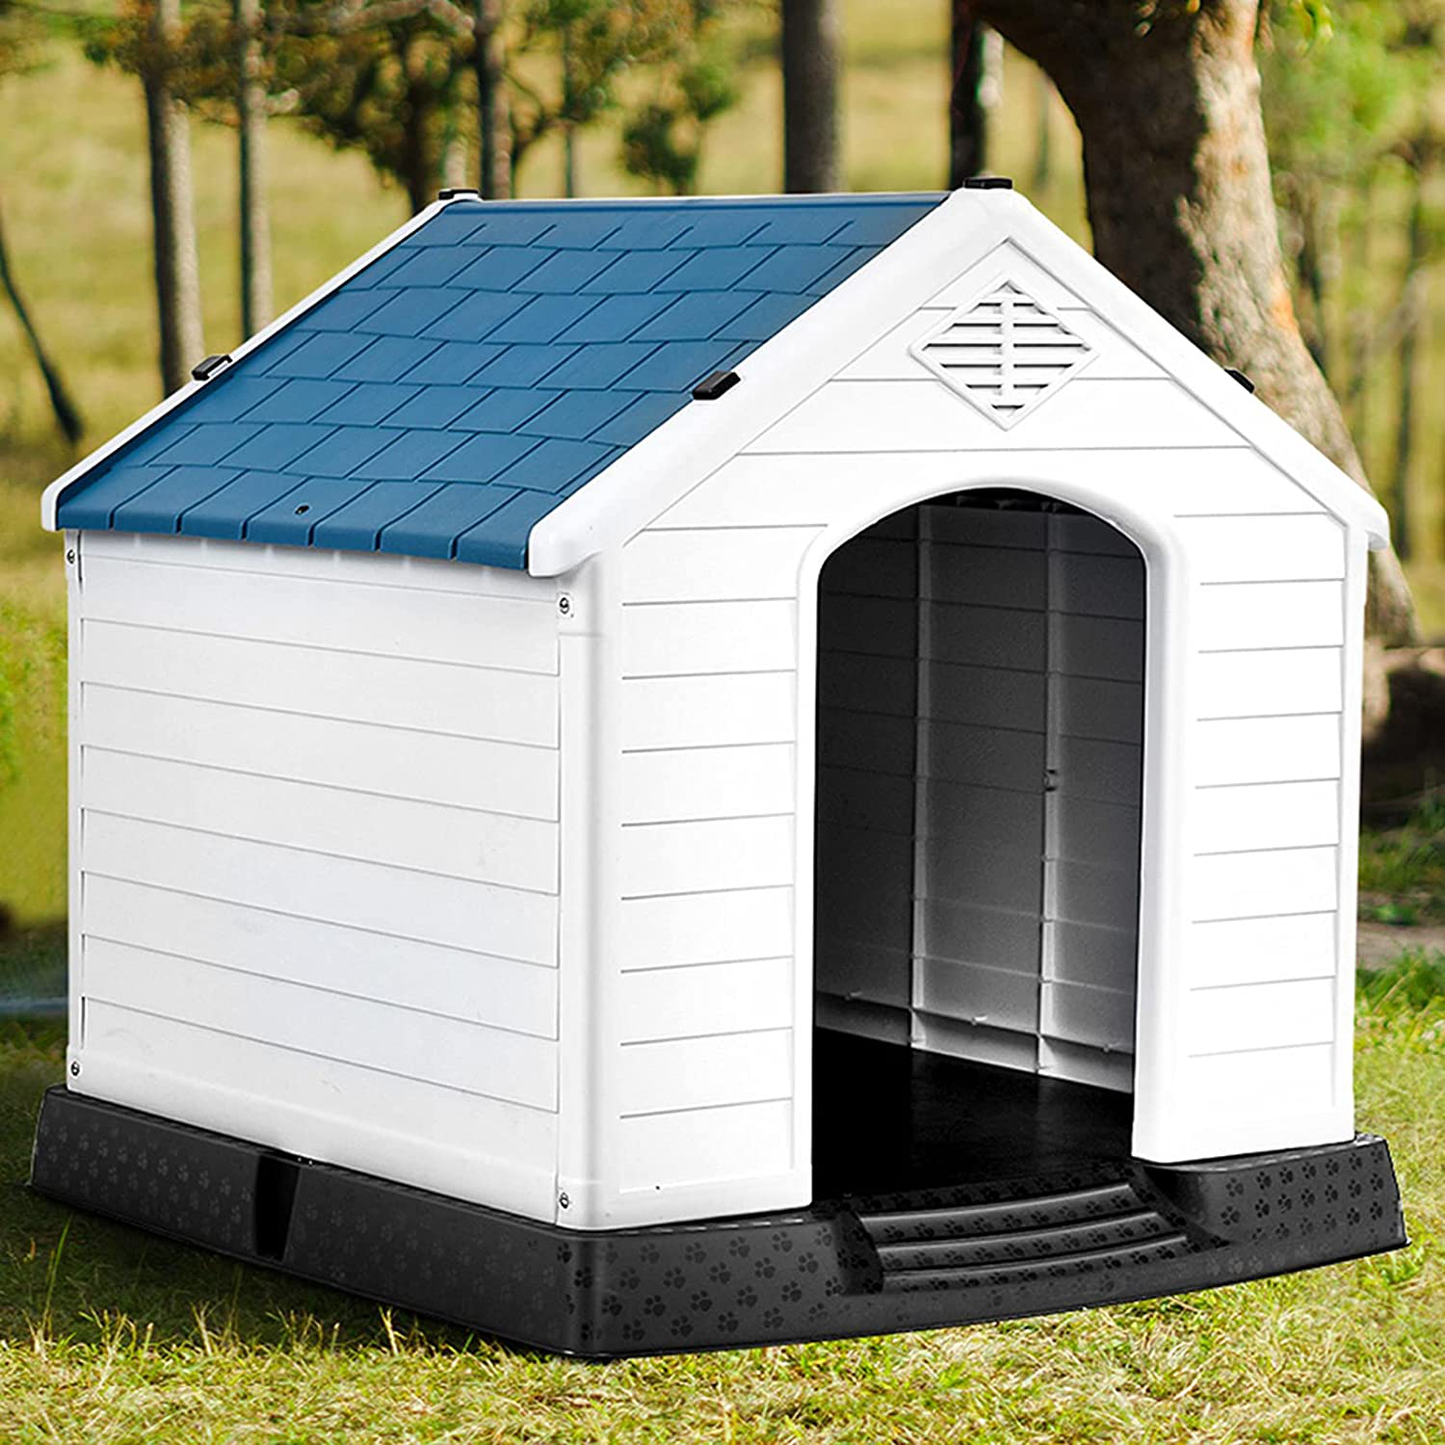 Giantex Dog House for Large Medium Dogs, Waterproof Plastic Dog Houses with Air Vents and Elevated Floor, Easy to Assemble, Outdoor Cat House Feeding Station Indoor Patio Backyard Dog Kennel House